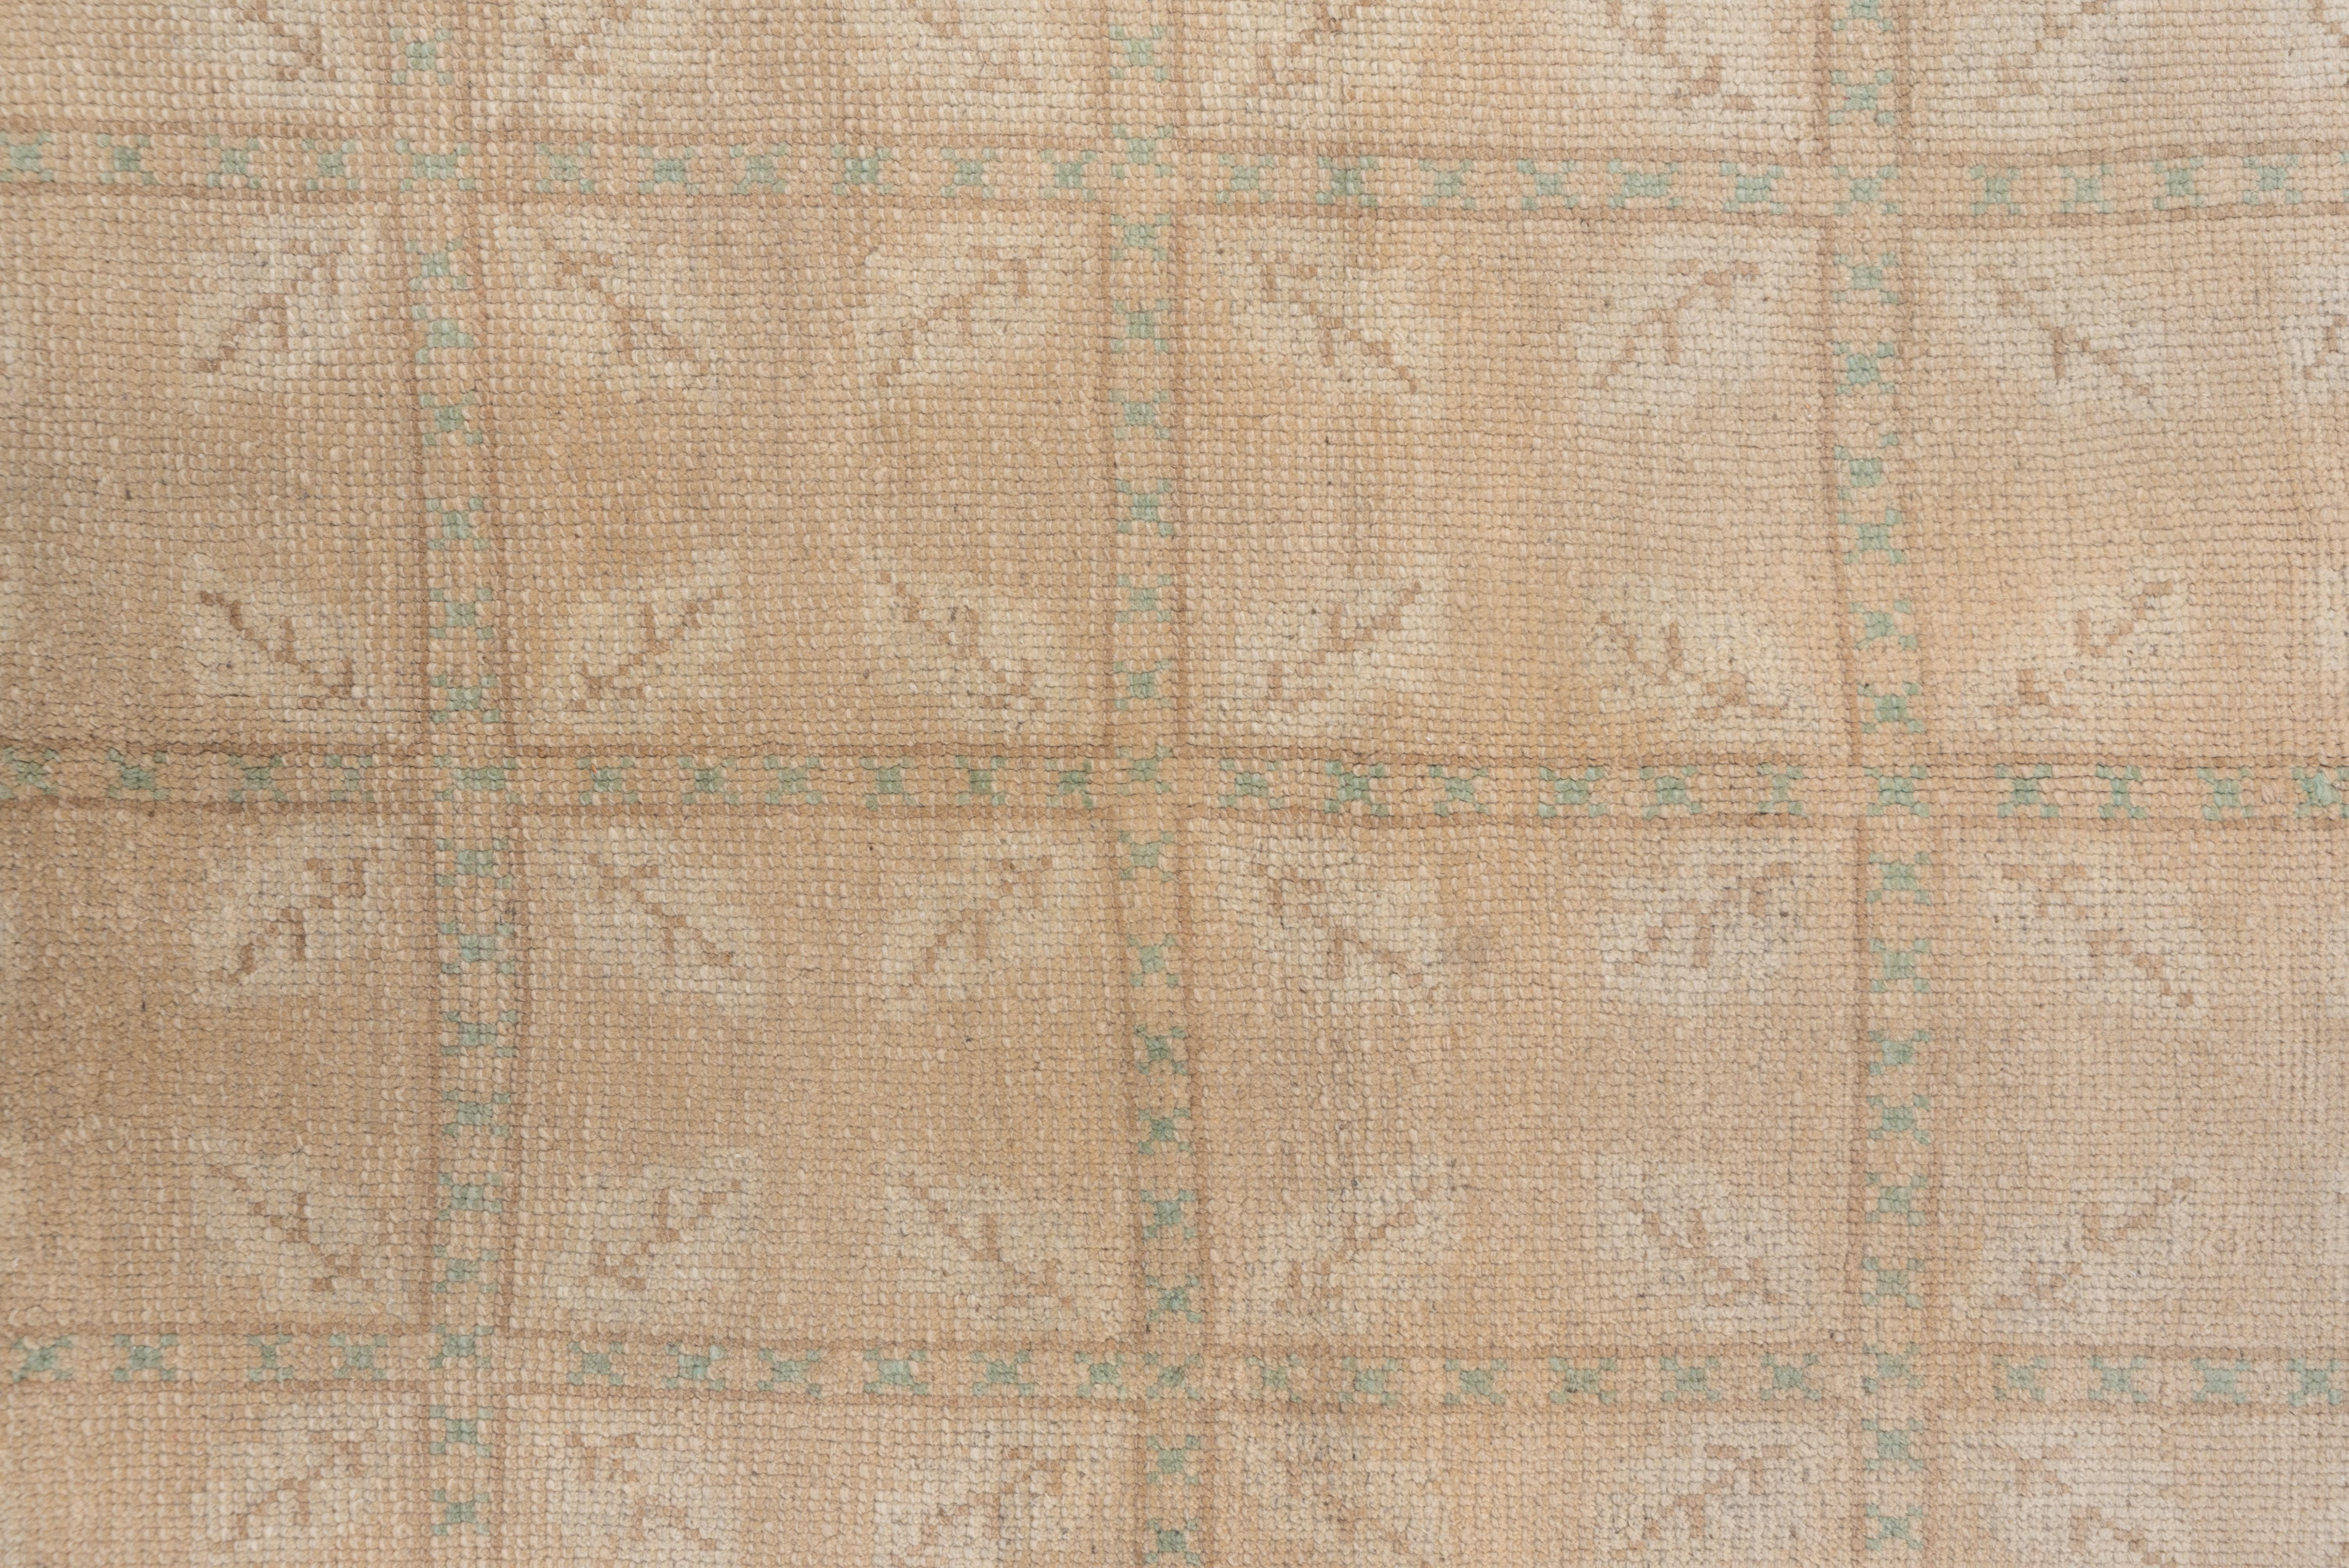 Four complete columns of sandy cream squares are decorated with four diagonal leaves each there is no border. Some details are in mottled red-brown, dark brown or light brown. The handle is especially floppy. The palette is soft and the style is Neo